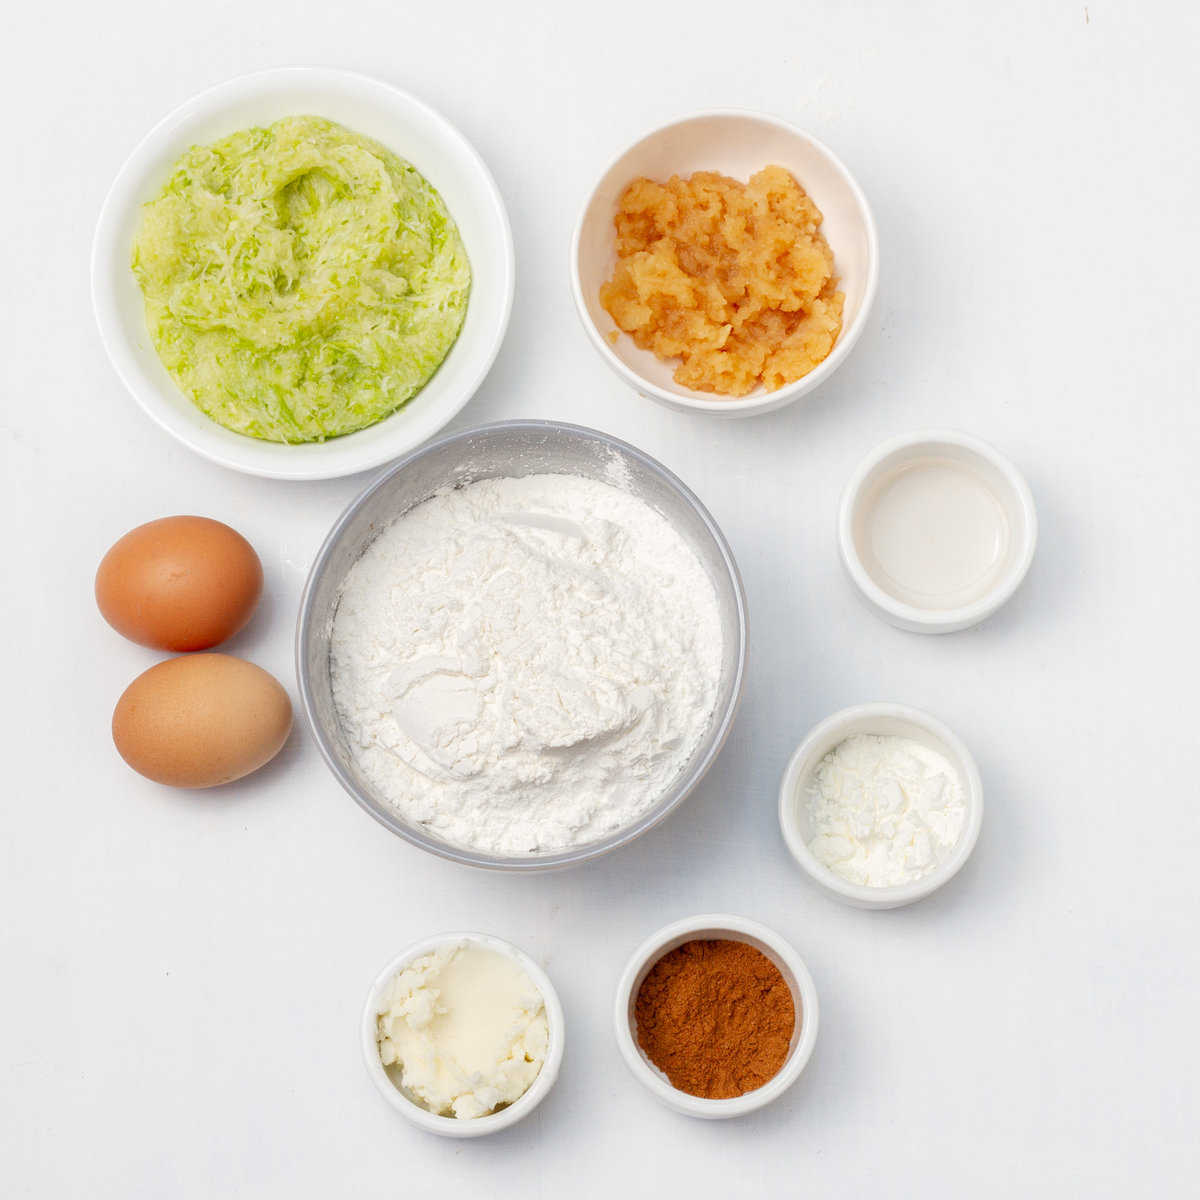 Ingredients of gluten-free all-purpose flour, baking powder, ground cinnamon, grated apples, stevia, coconut oil, vanilla, grated zucchini, and salt in separate dishes. 